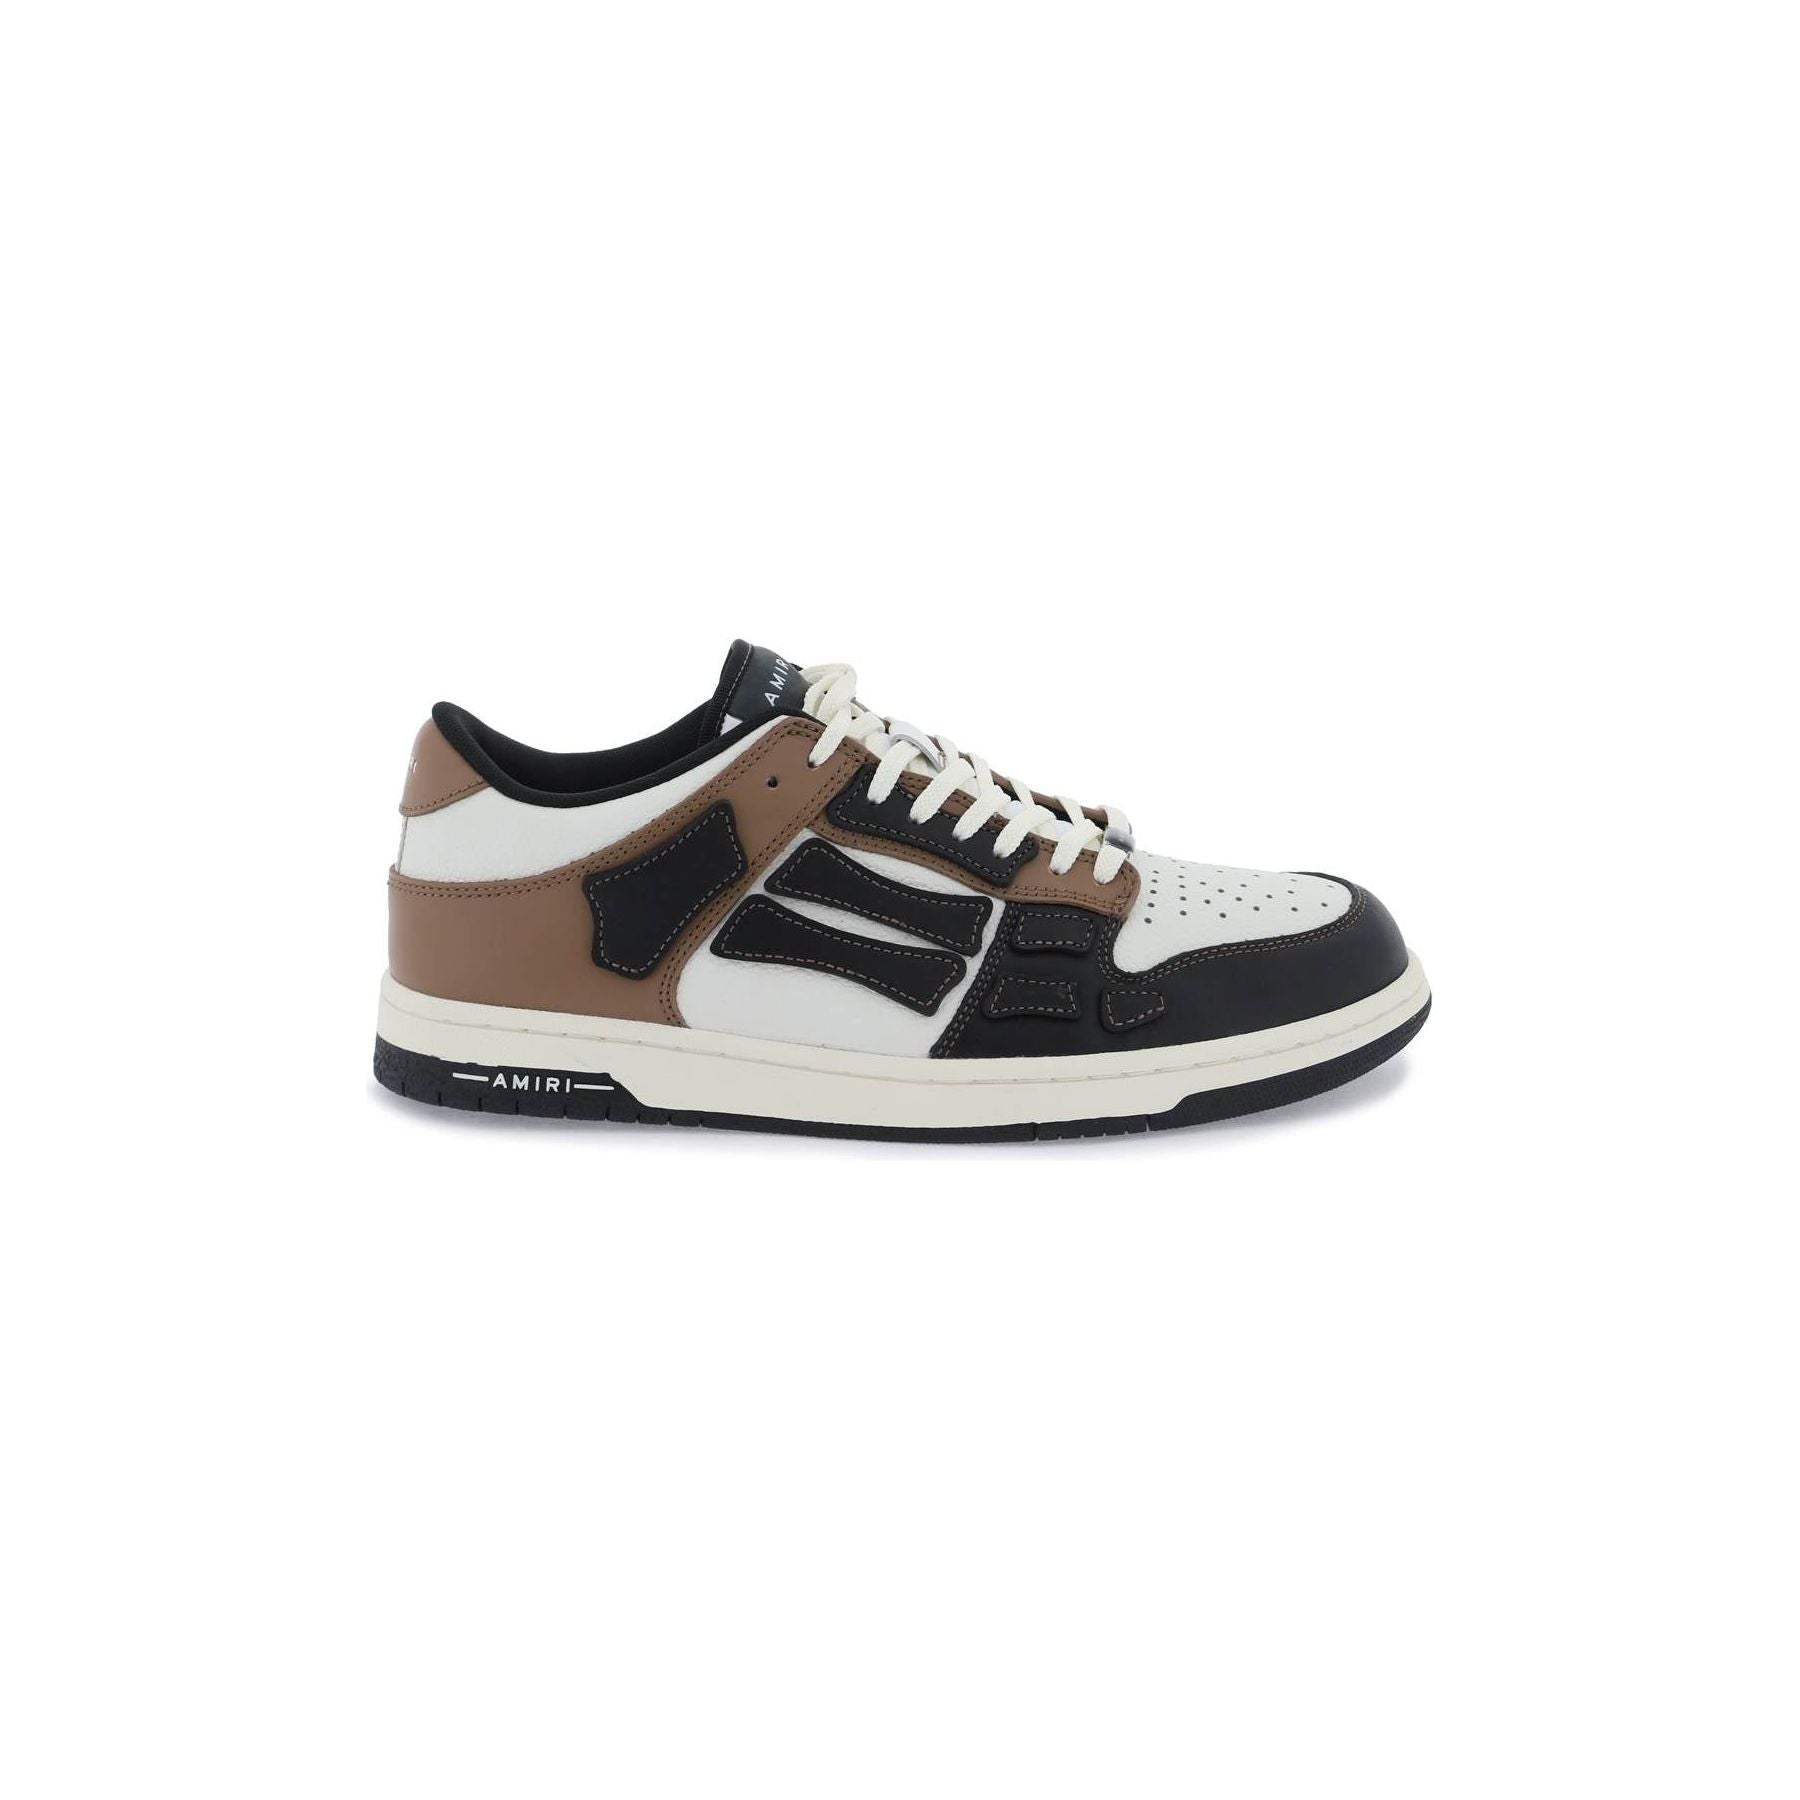 Skel Leather and Mesh Top Low Sneakers